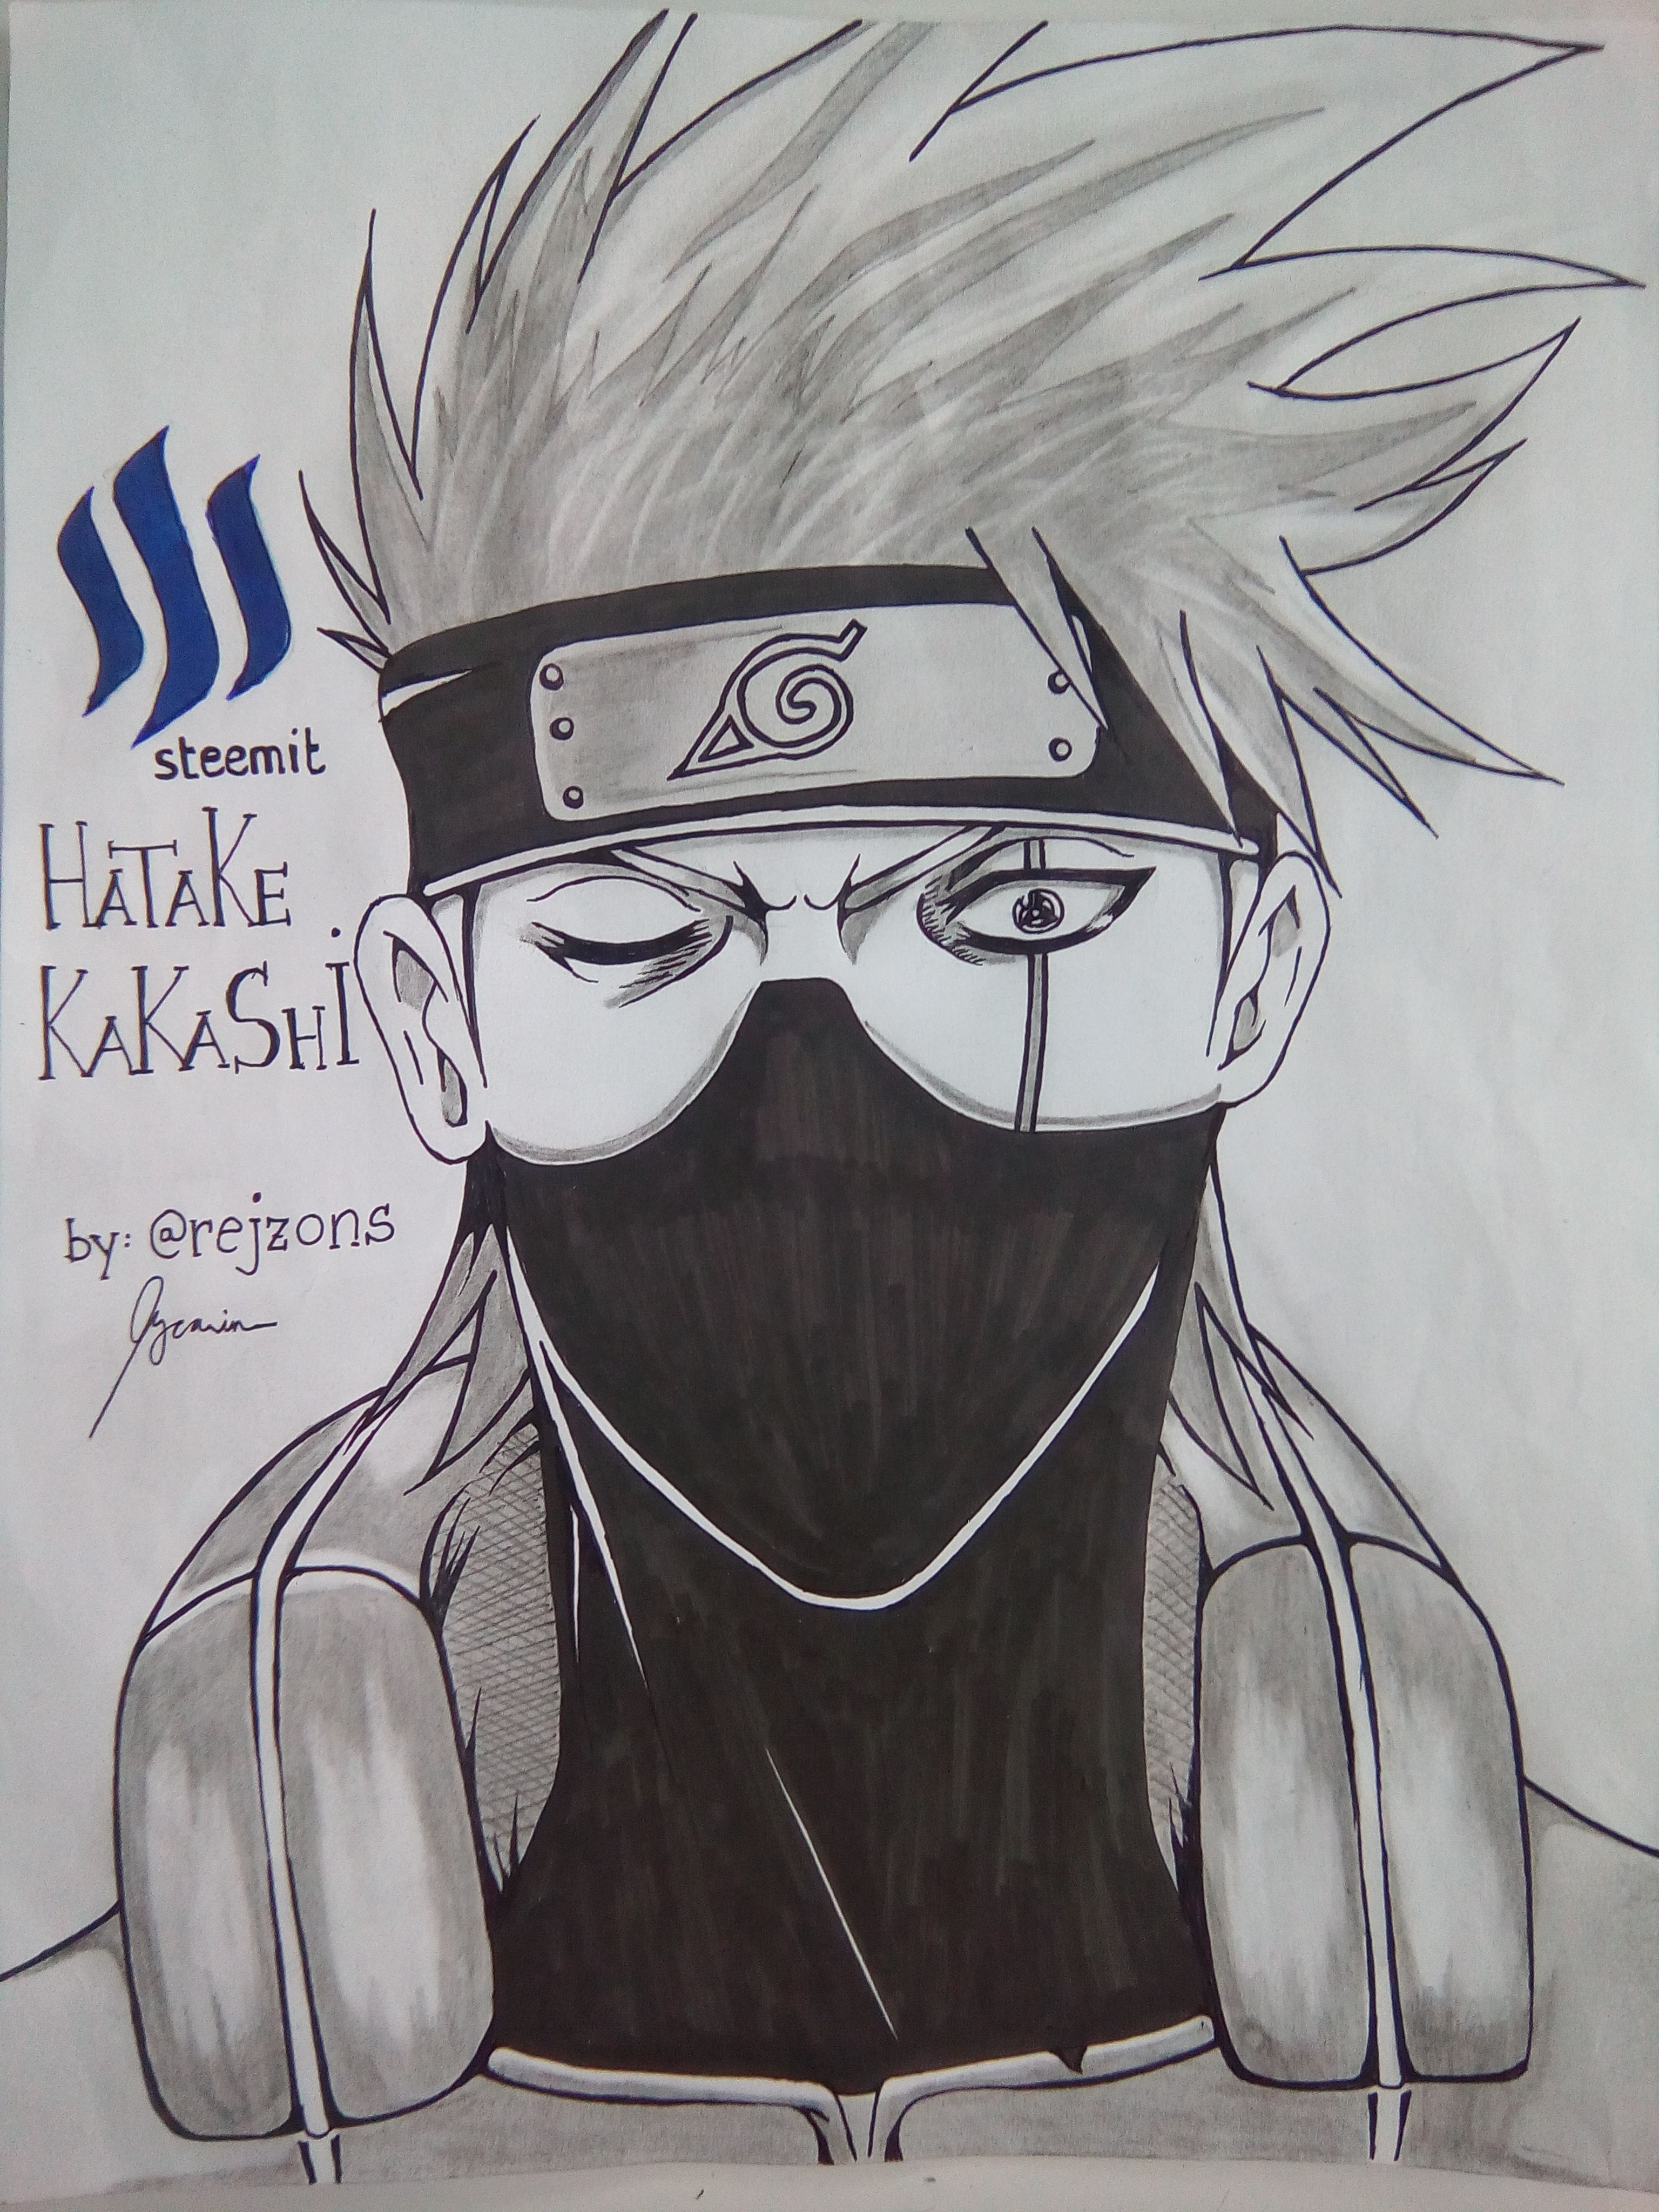 Adilsons - Kakashi Hatake from Naruto was drawn by the talented K.c Nc for  the drawing contest March 2021 edition organised by Adilsons. Kakashi Hatake  is a shinobi of Konohagakure's Hatake clan.